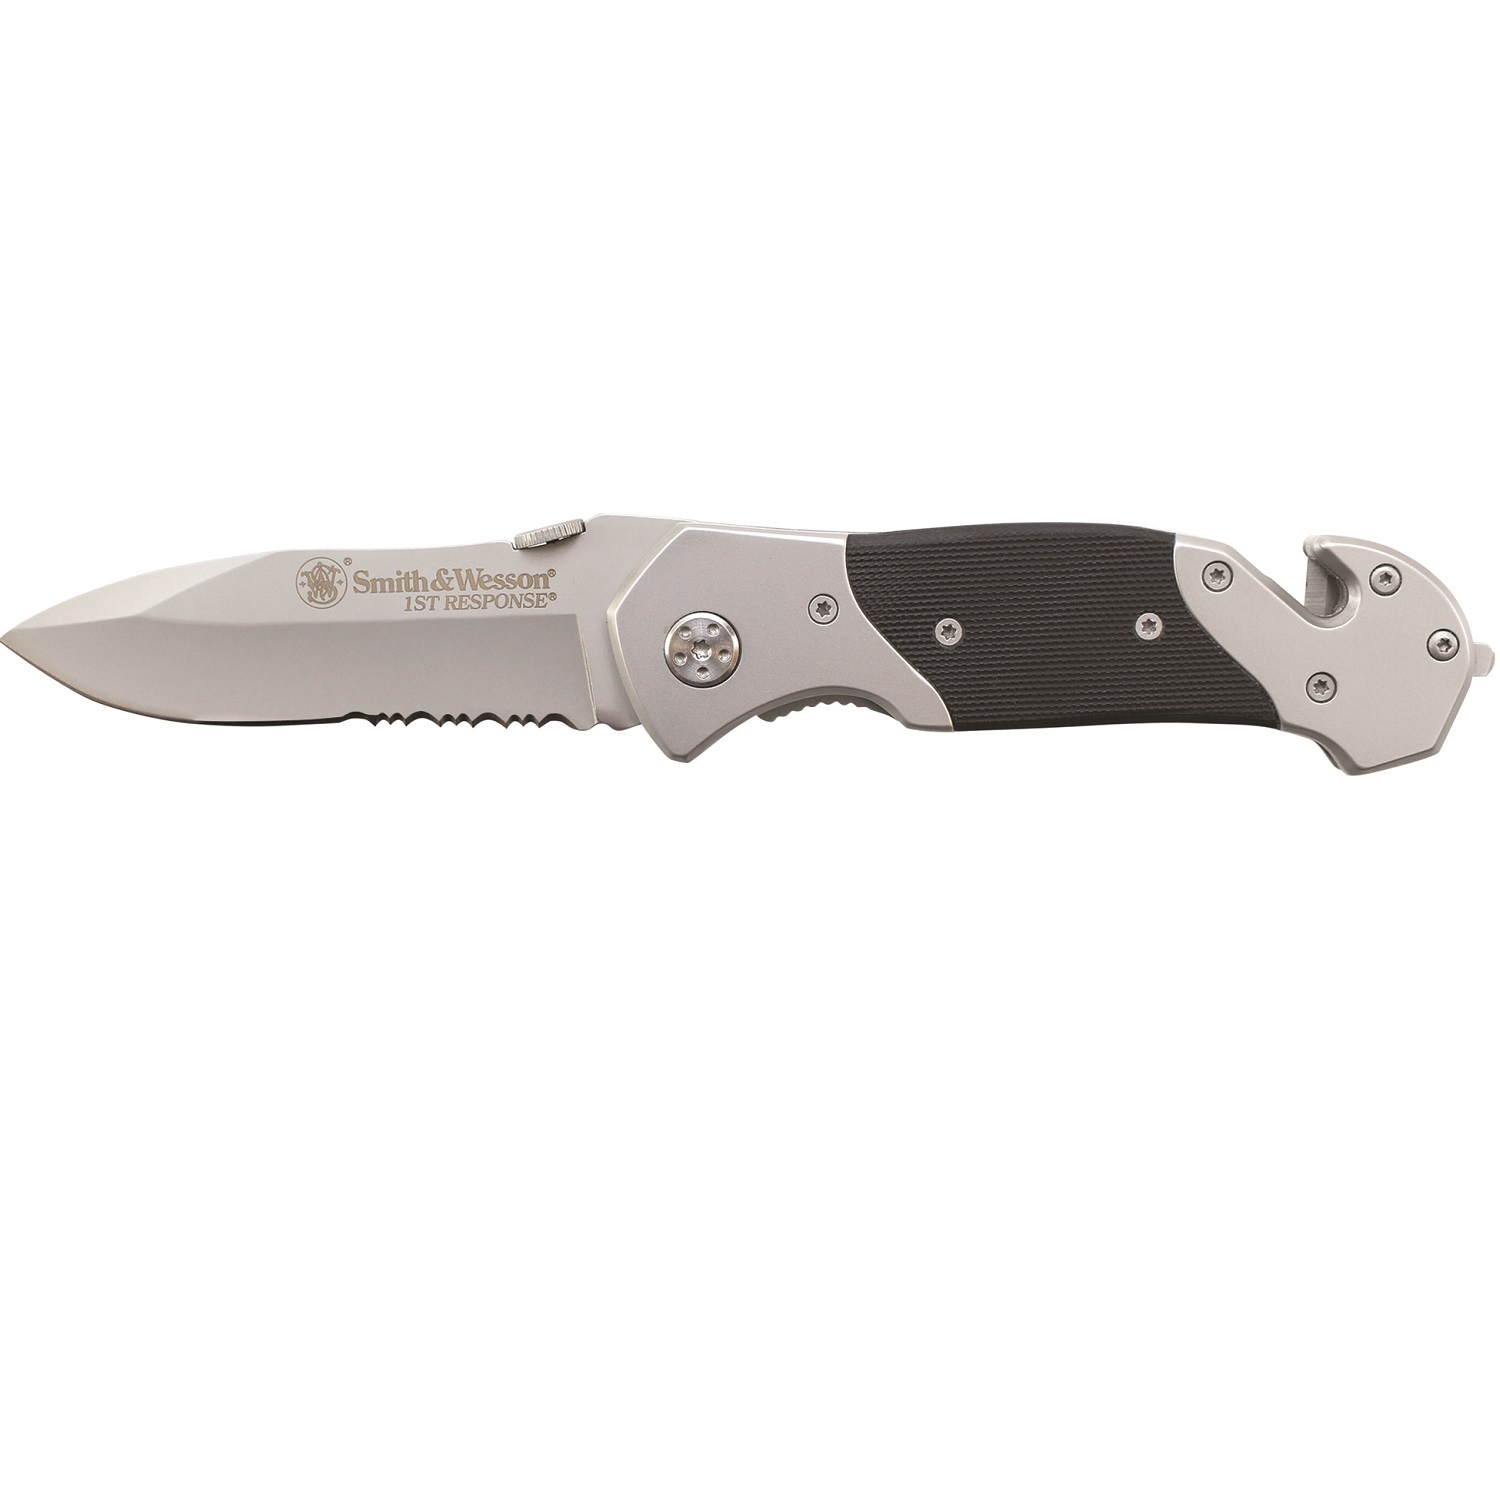 Taylor Brands Smth and Wssn 1st Resp Part Serrated Drop Pt Folding Knife